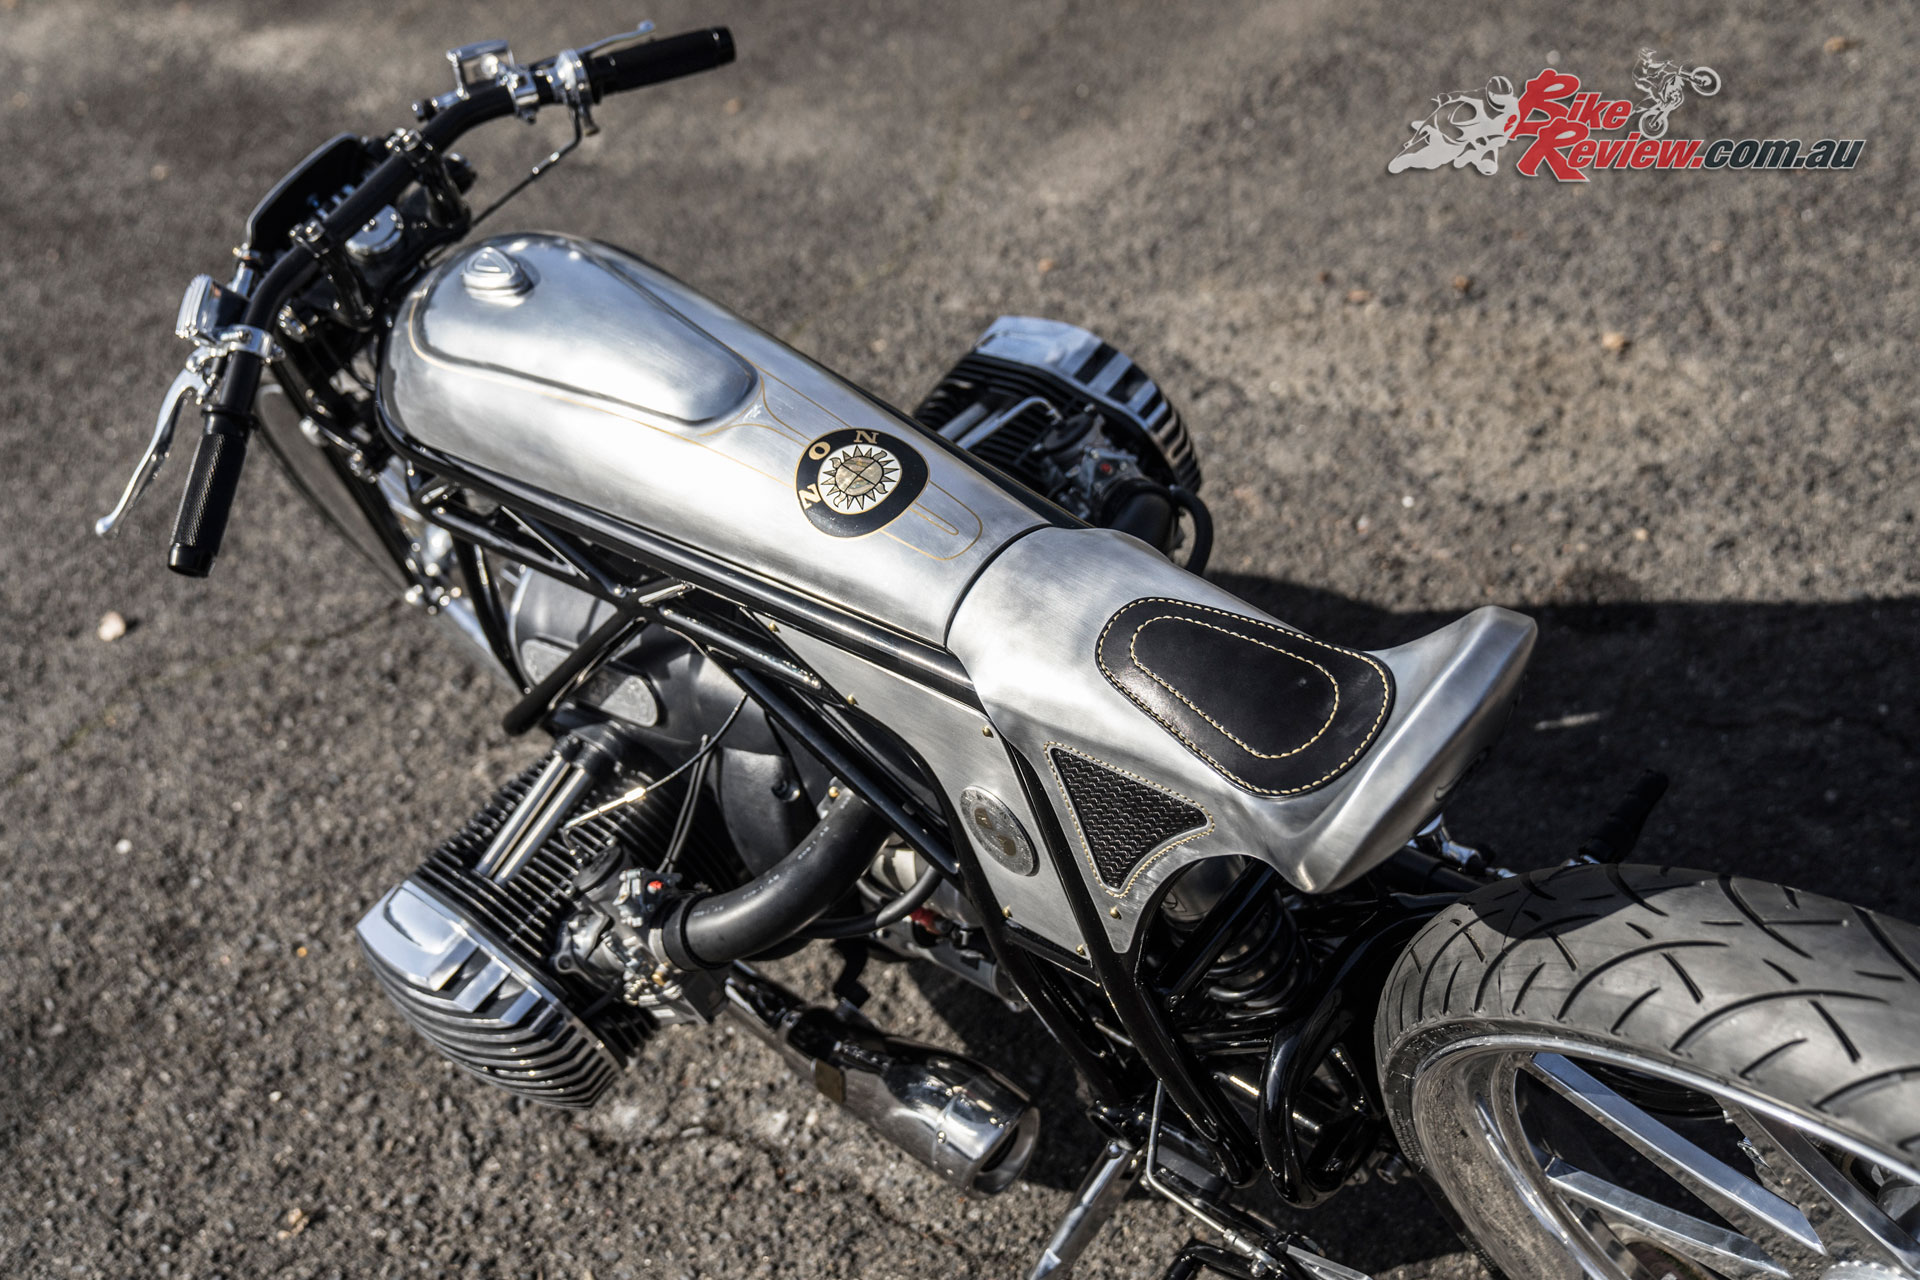 Custom Works Zon with 'Departed' featuring the BMW Big Boxer